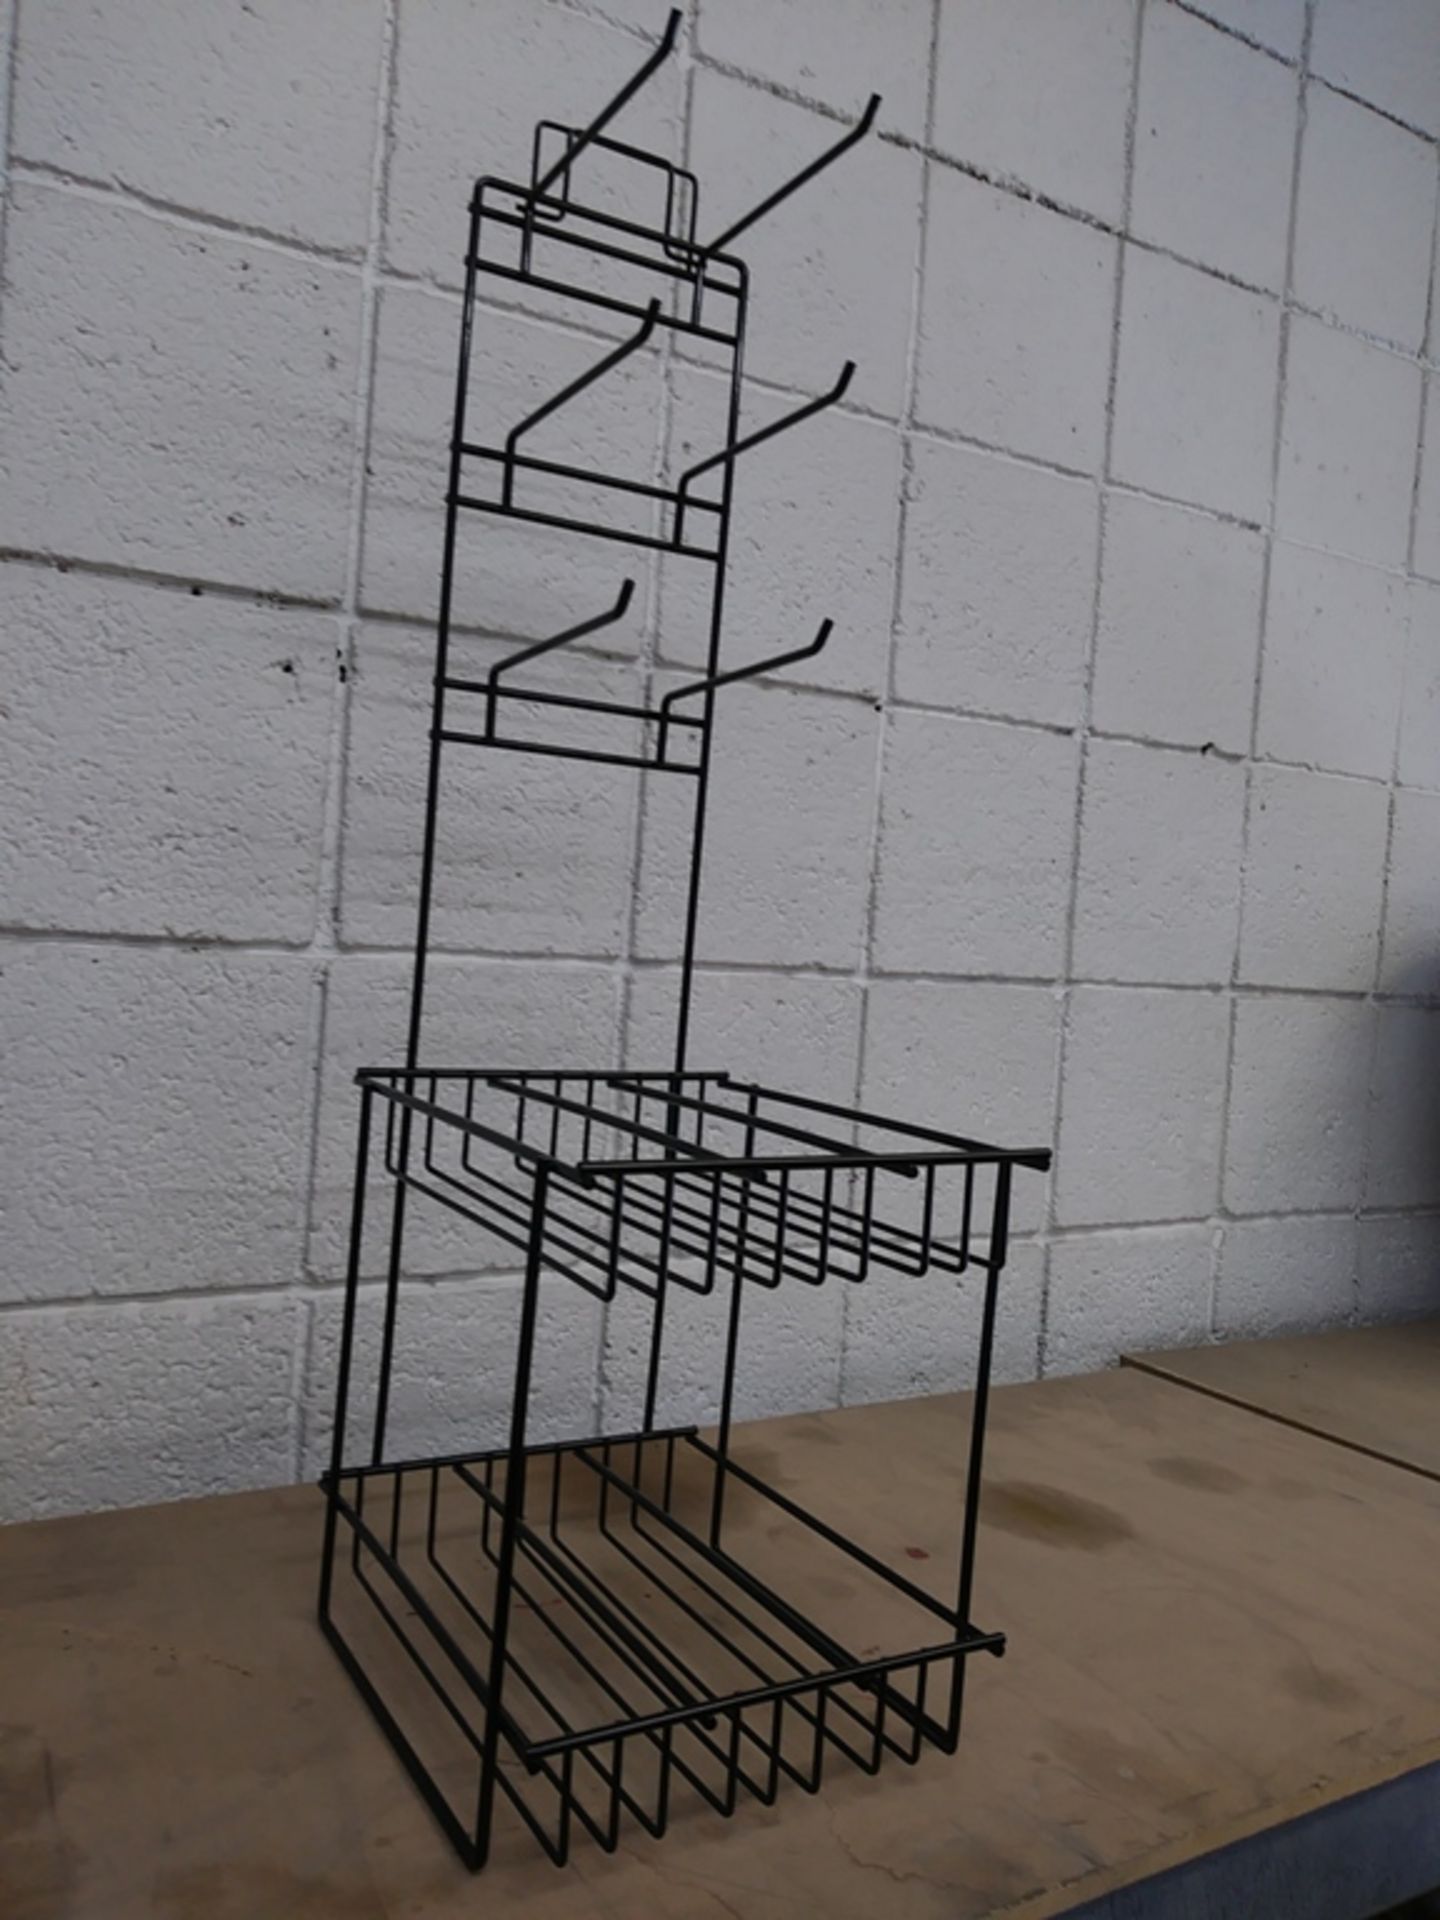 METAL PRODUCT DISPLAY RACKS (INCLUDES QTY: 30) - Image 3 of 7